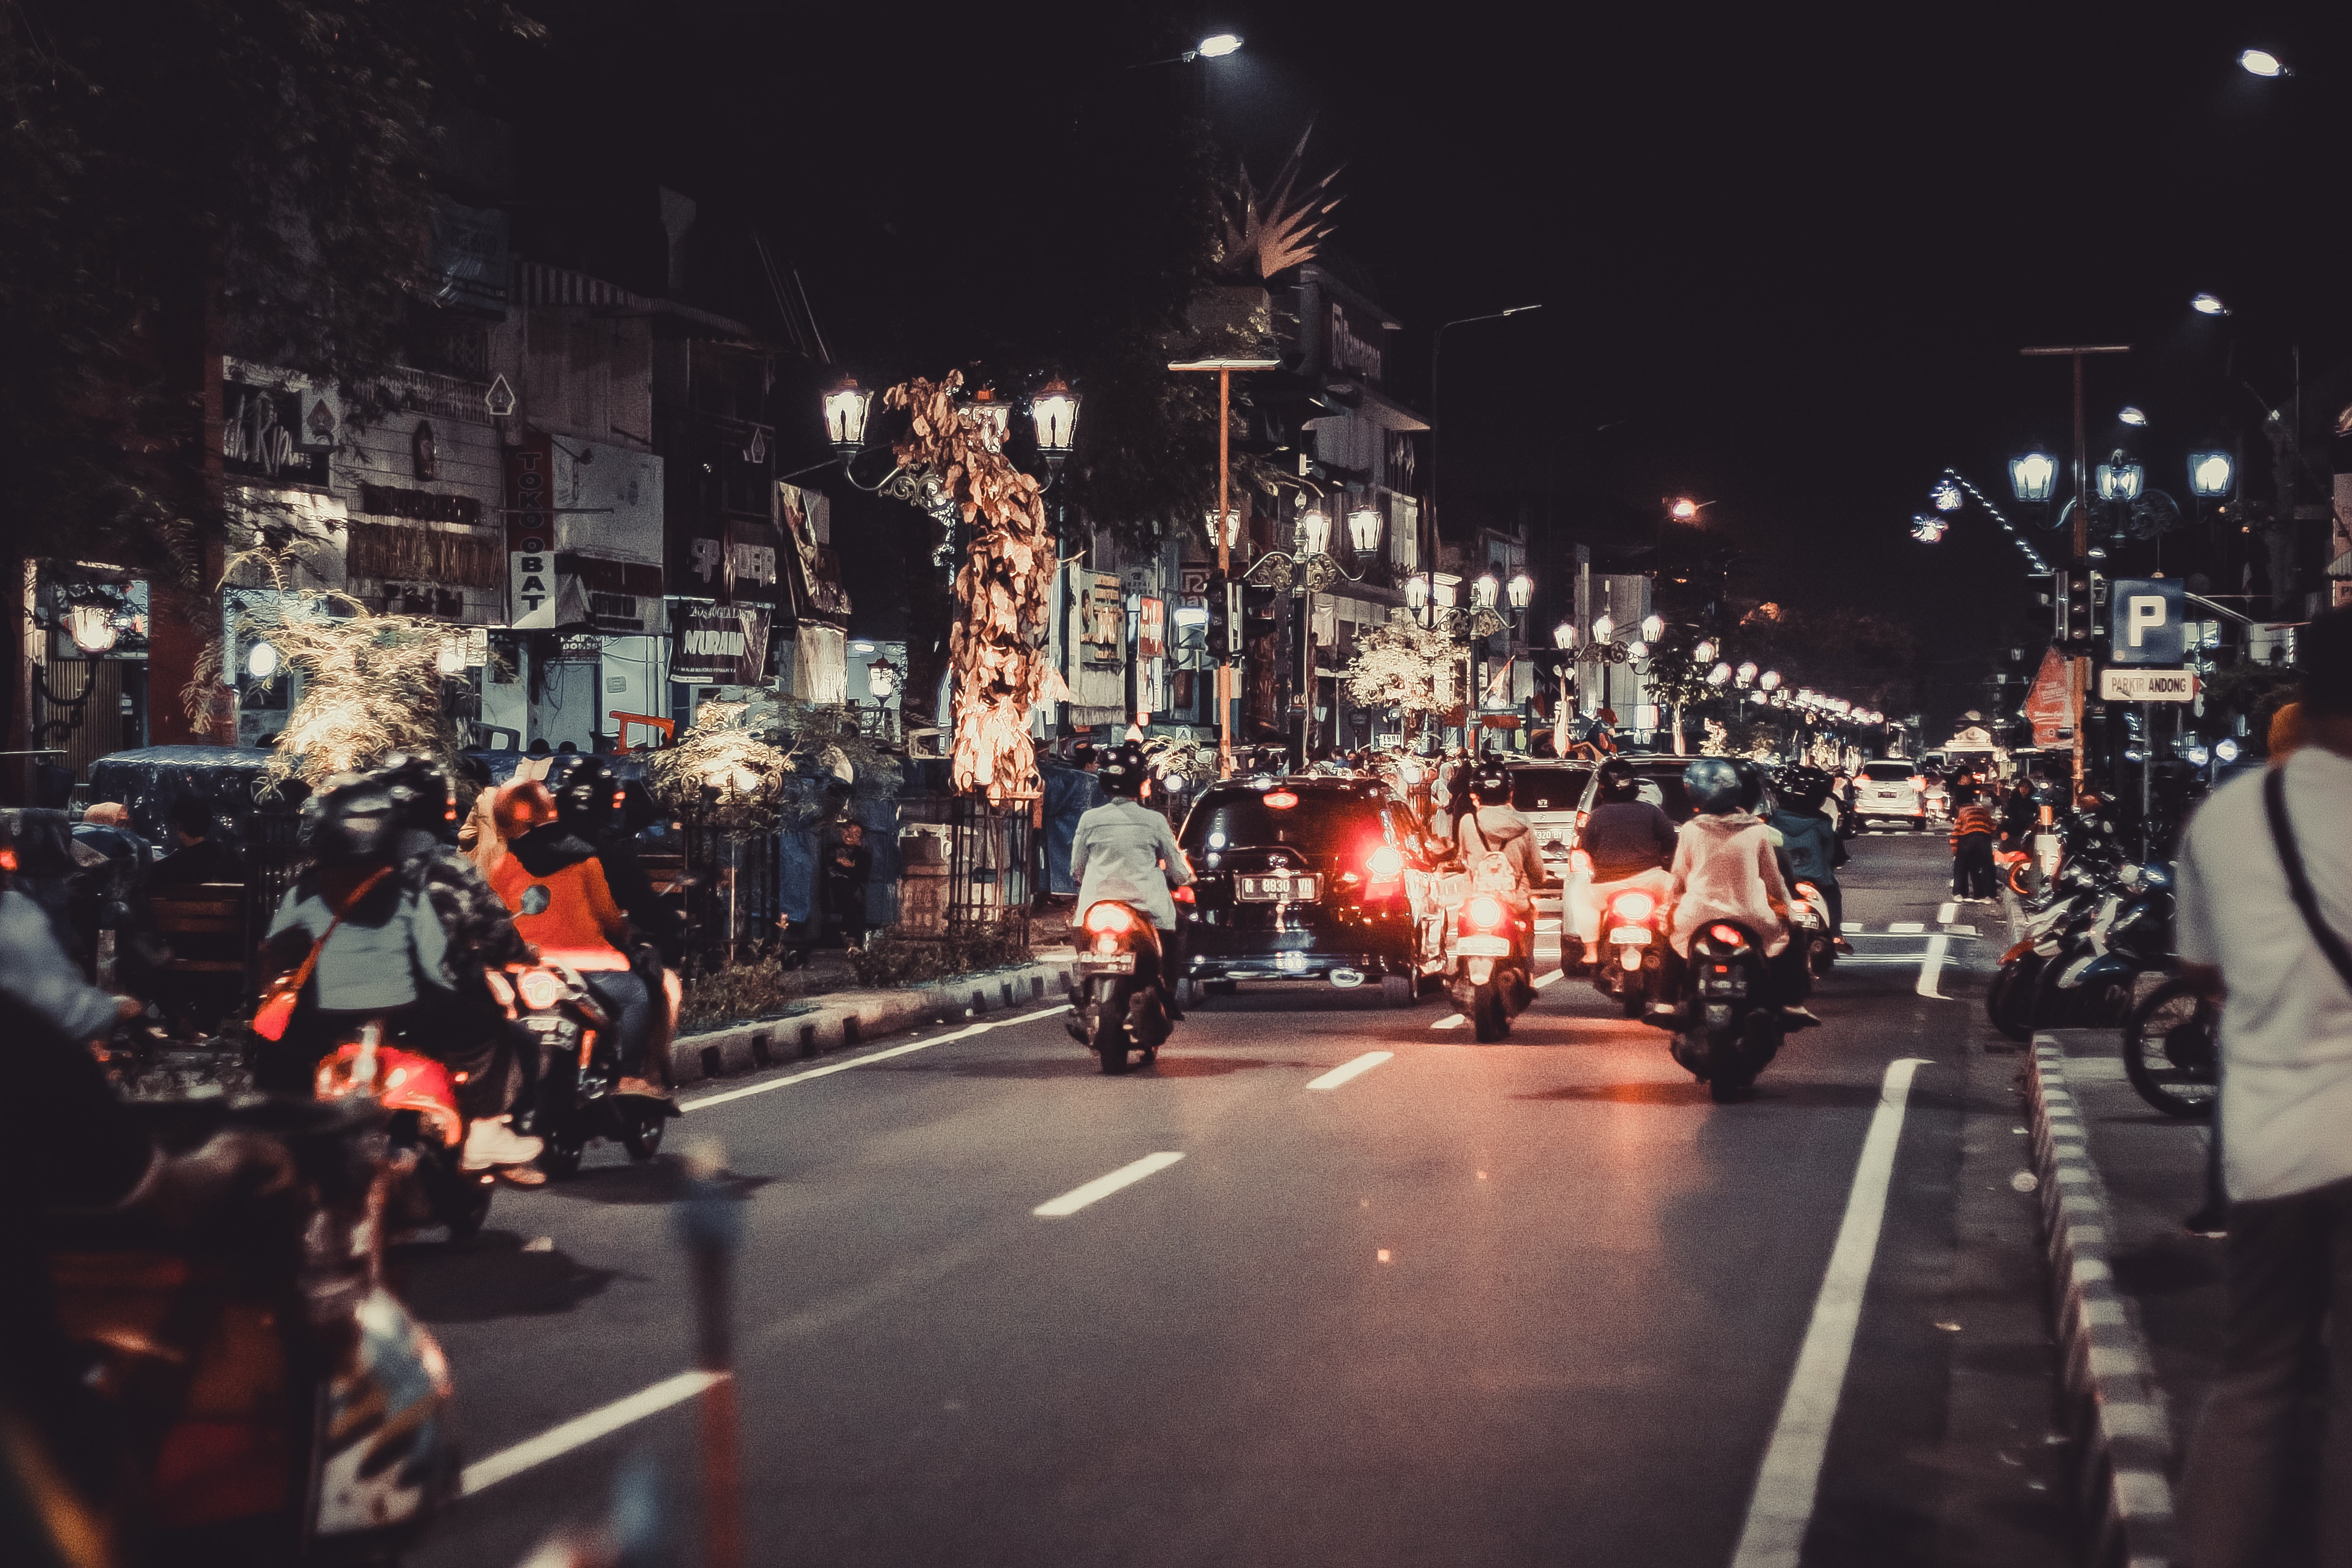 People Riding Motorcycles On Road During Night Time, Asphalt, Outdoors, Transportation system, Traffic, HQ Photo